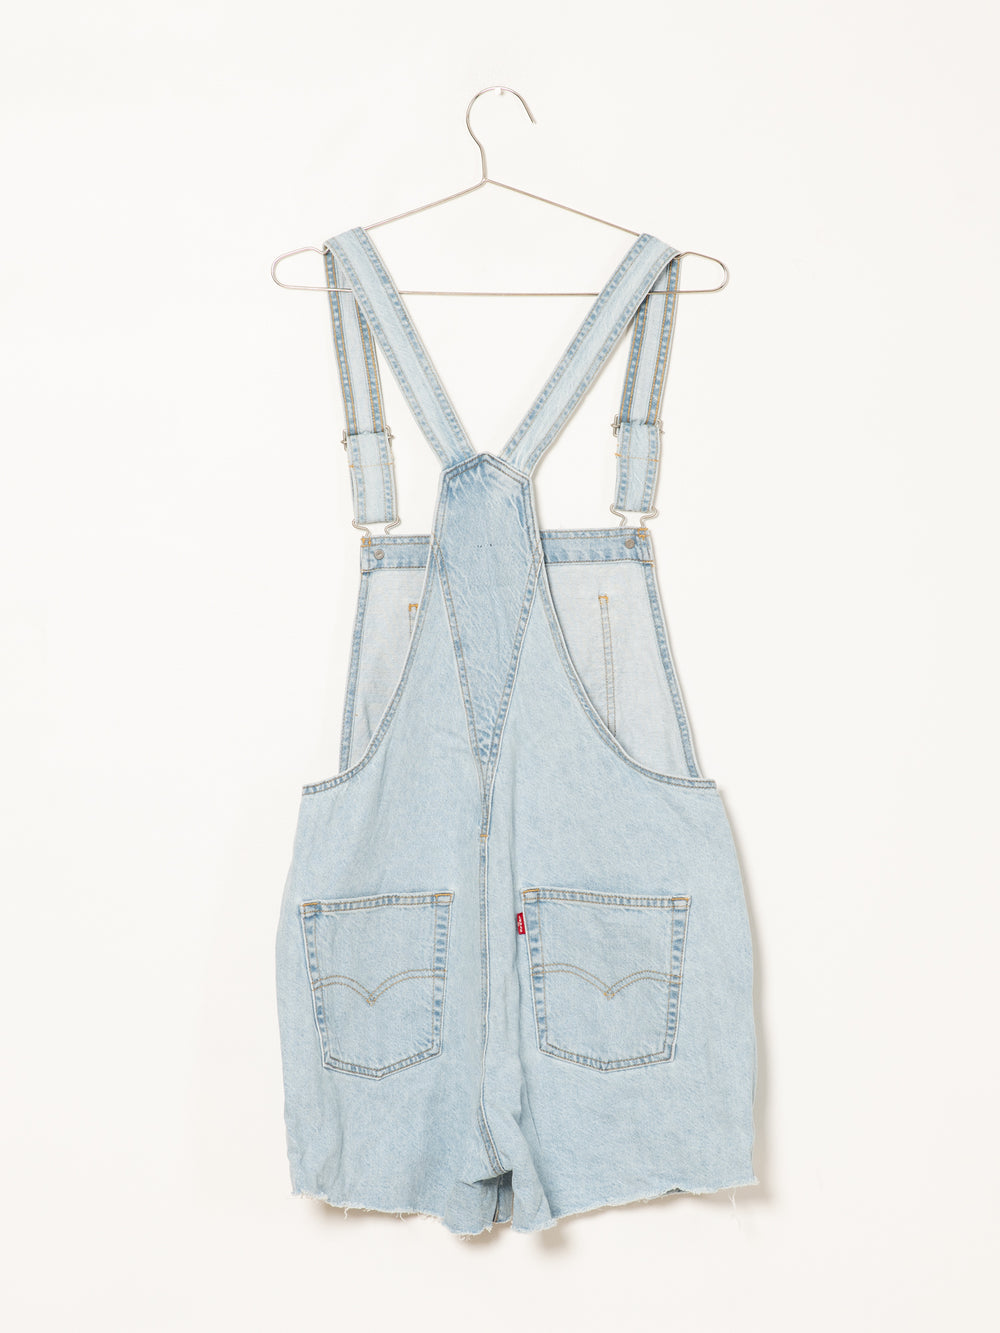 LEVIS VINTAGE SHORTALL - CLEARANCE